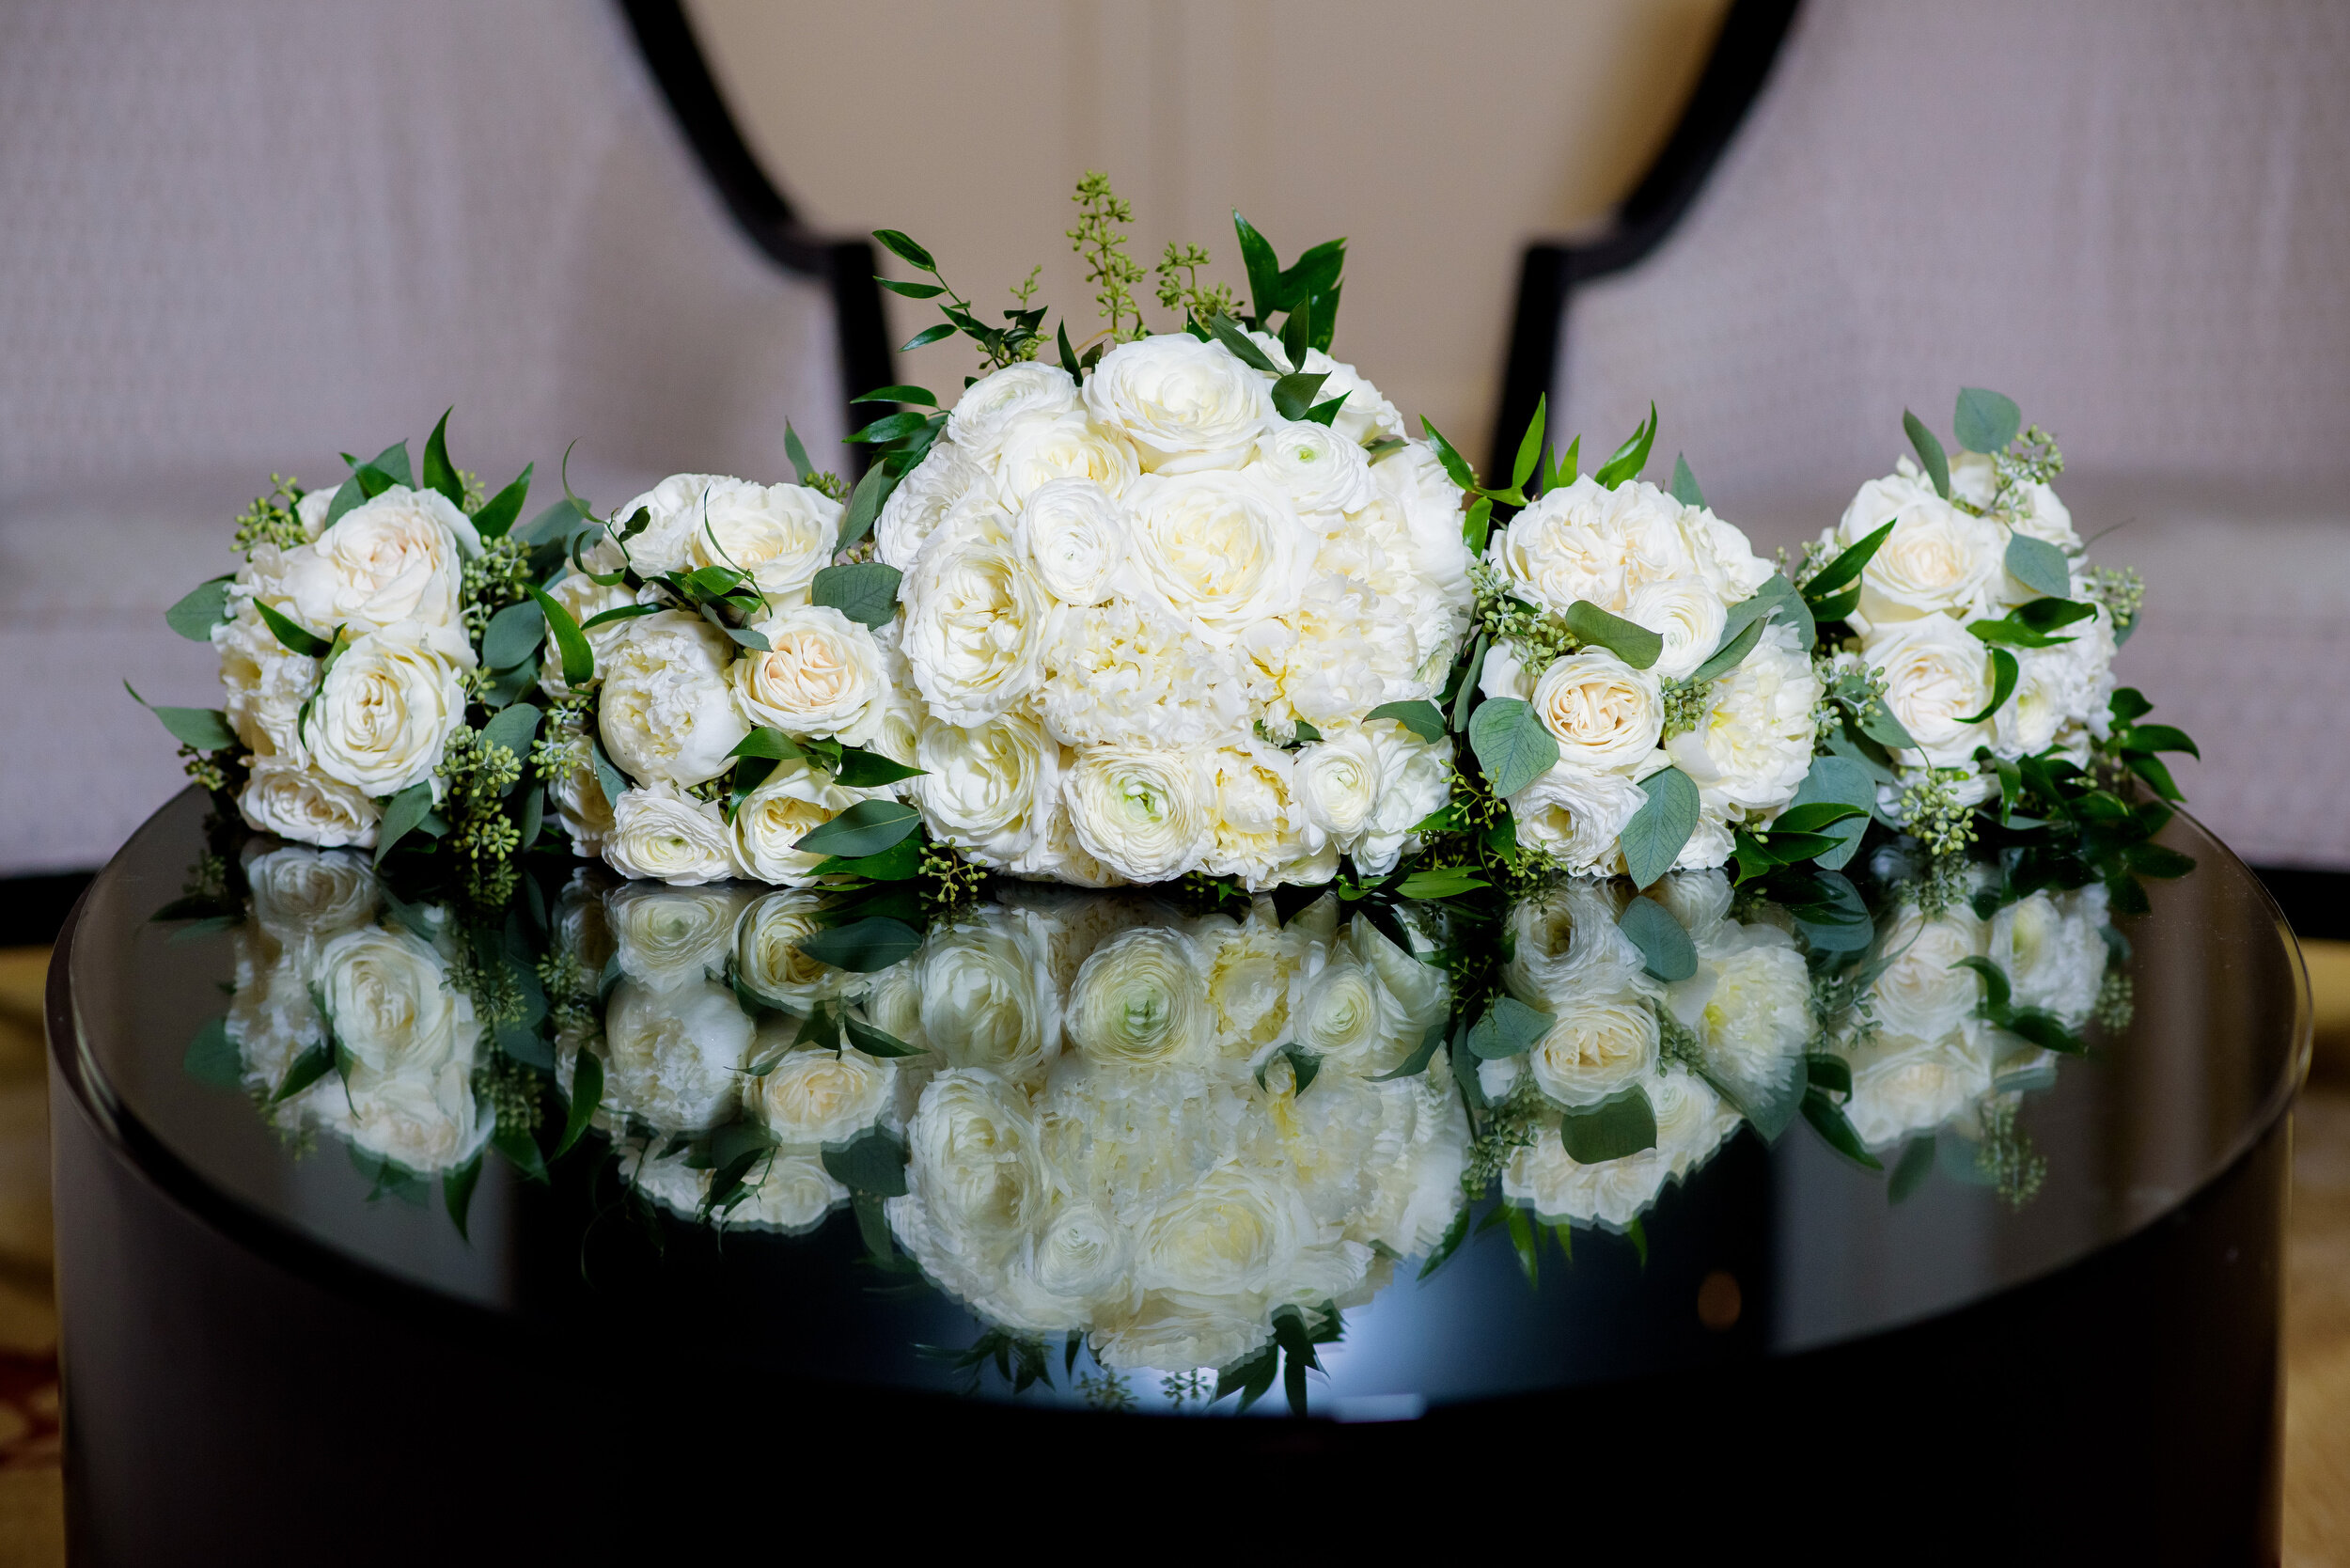 Wedding bouquet detail photo: Geraghty Chicago wedding photography captured by J. Brown Photography.